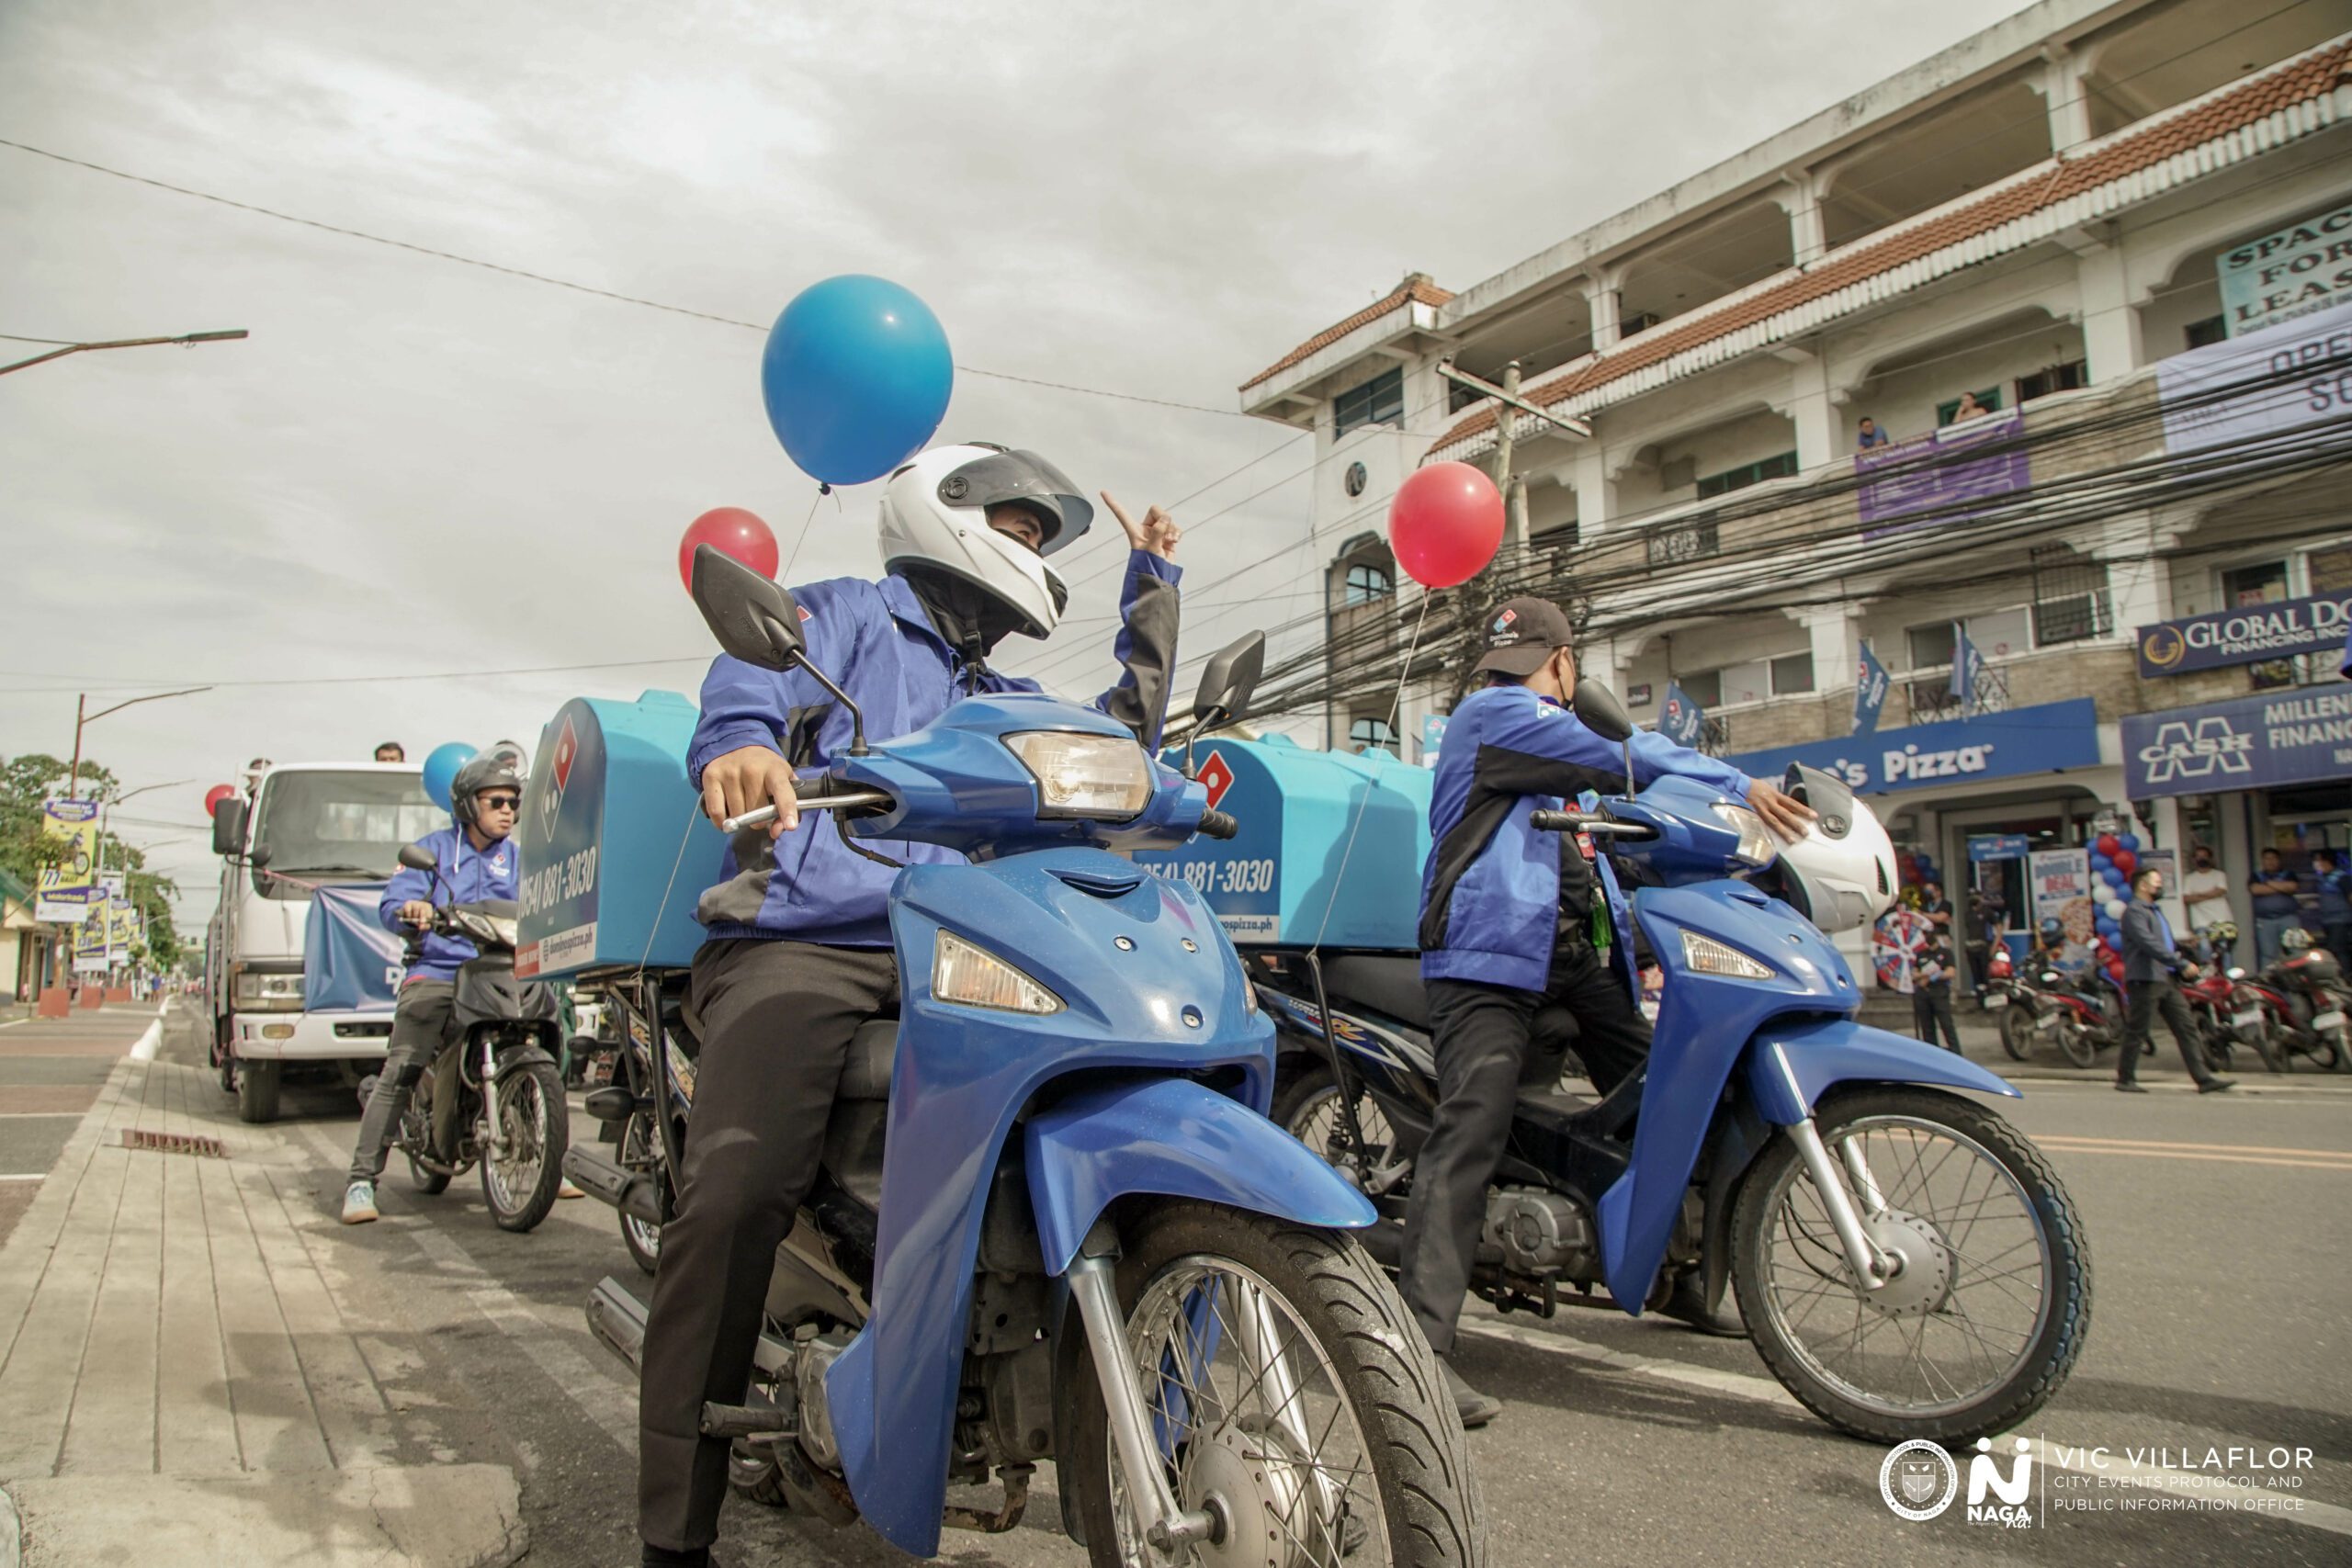 Delivery Riders for Domino's Pizza out on the opening motorcade on August 4, 2022.